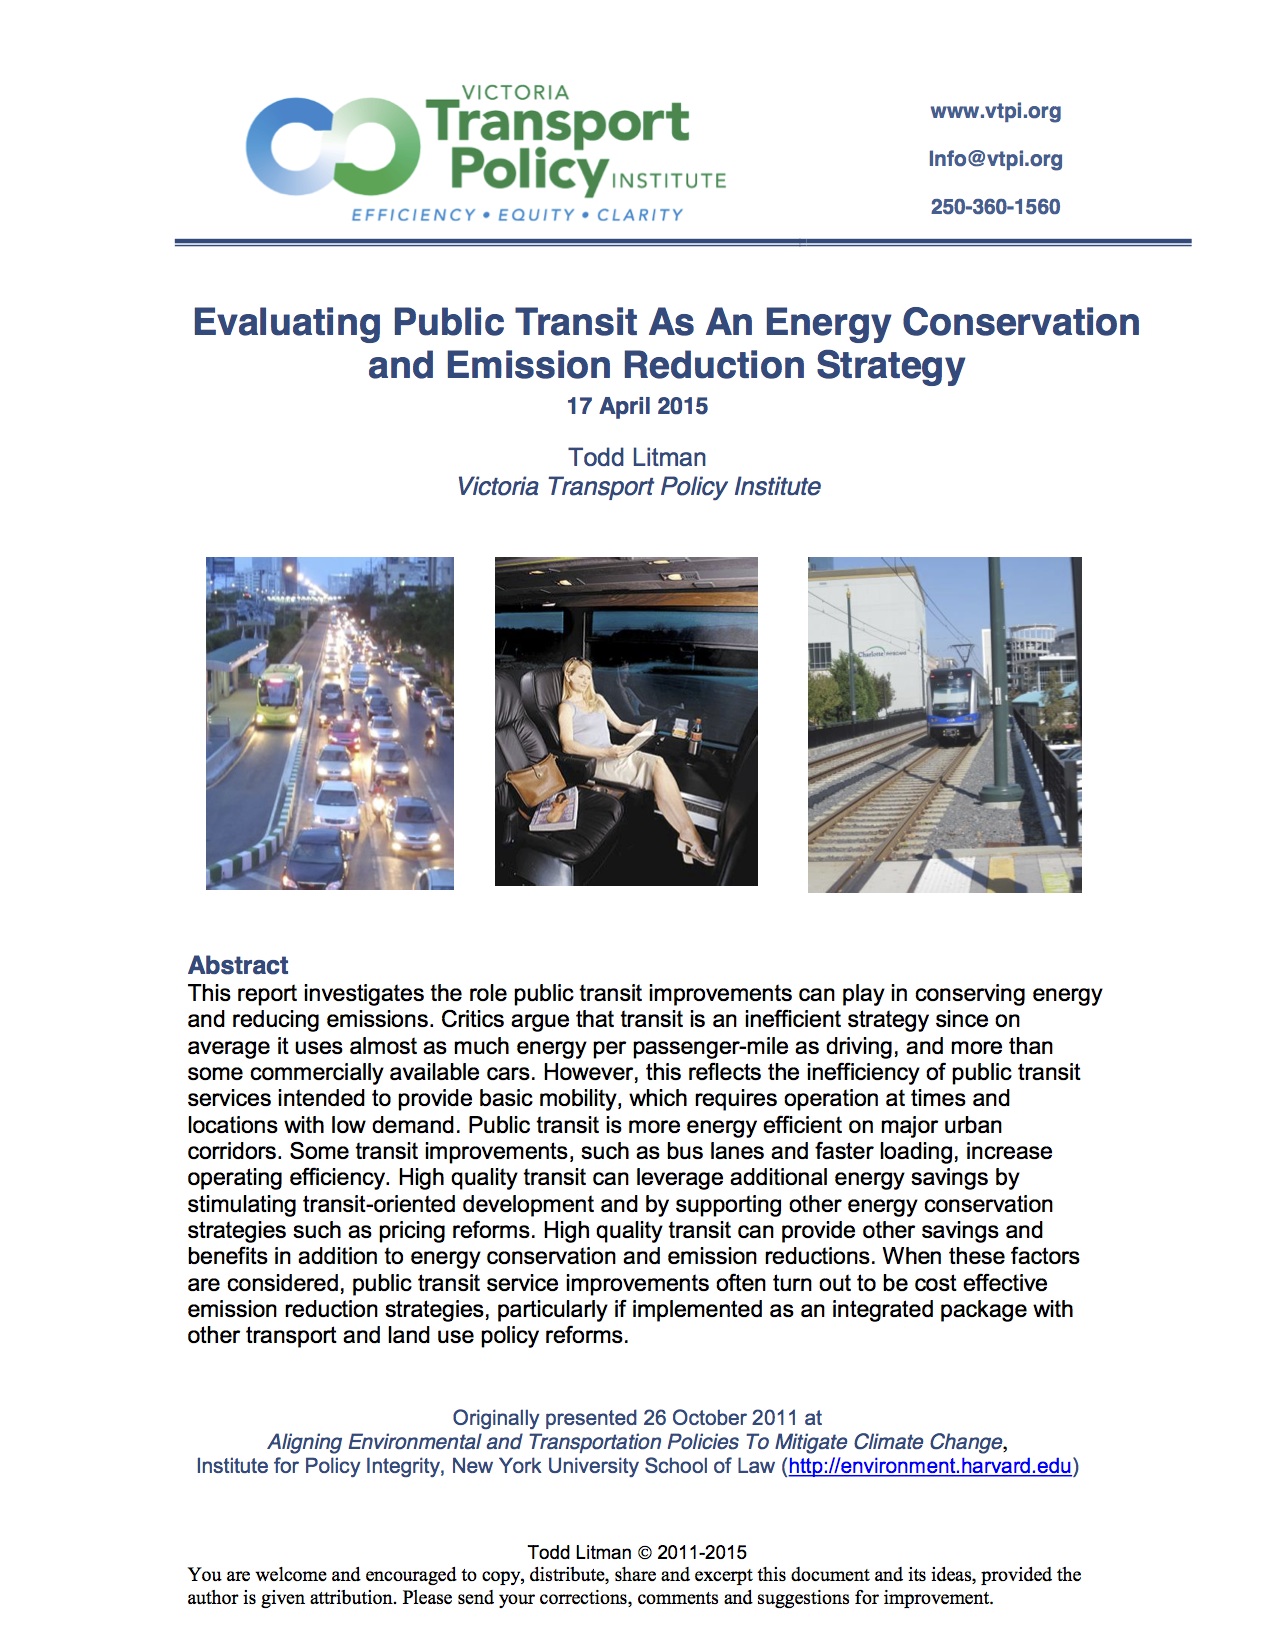 Evaluating Public Transit As An Energy Conservation and Emission Reduction Strategy